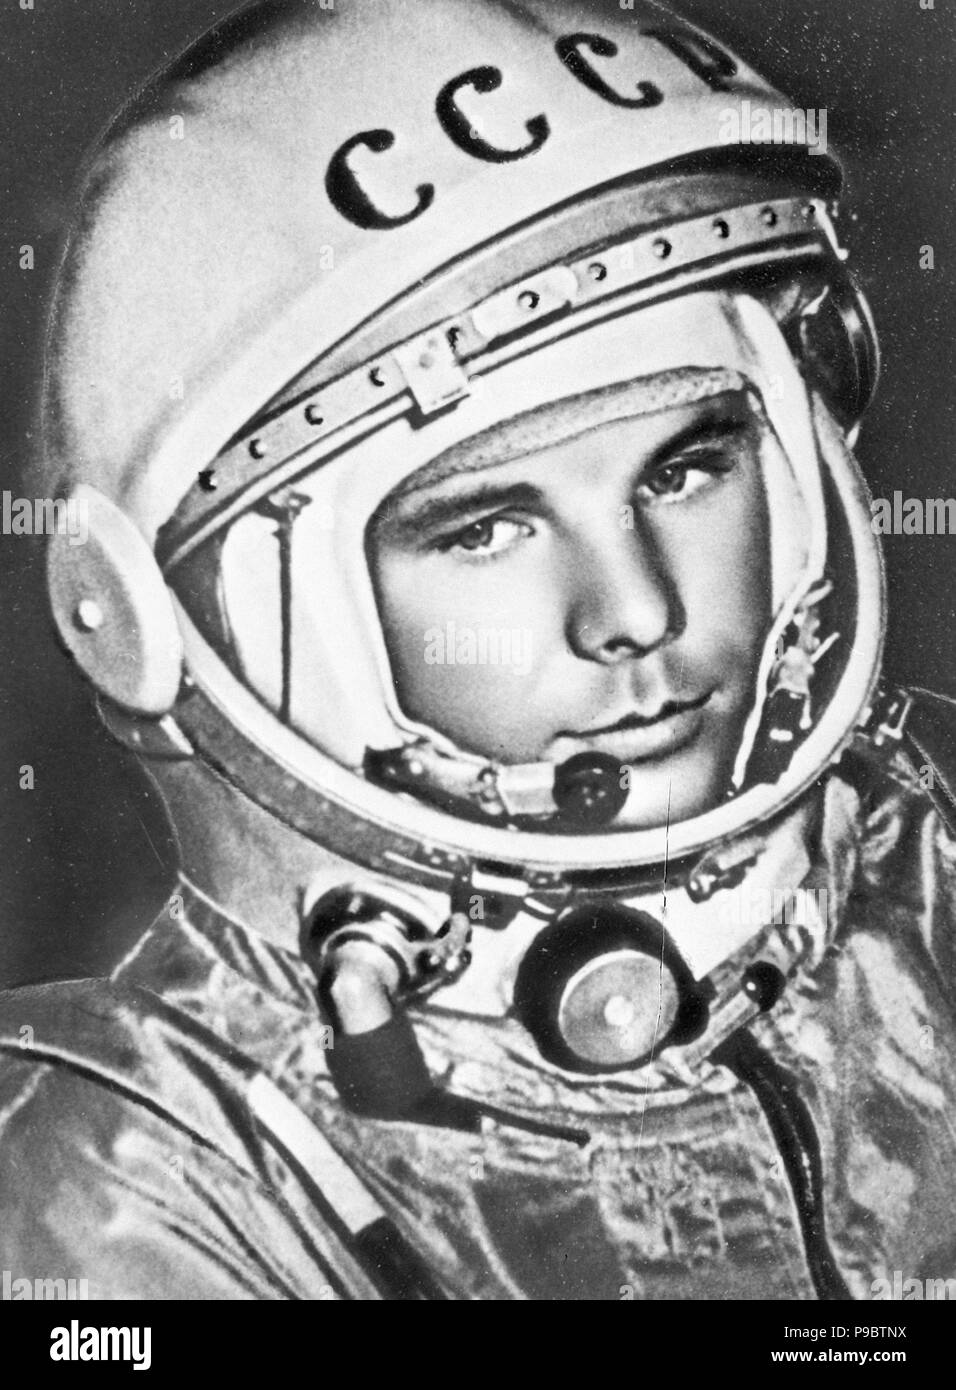 The cosmonaut Yuri Gagarin (1934-1968), the first human in outer space. Museum: State Central Museum of Contemporary History of Russia, Moscow. Stock Photo